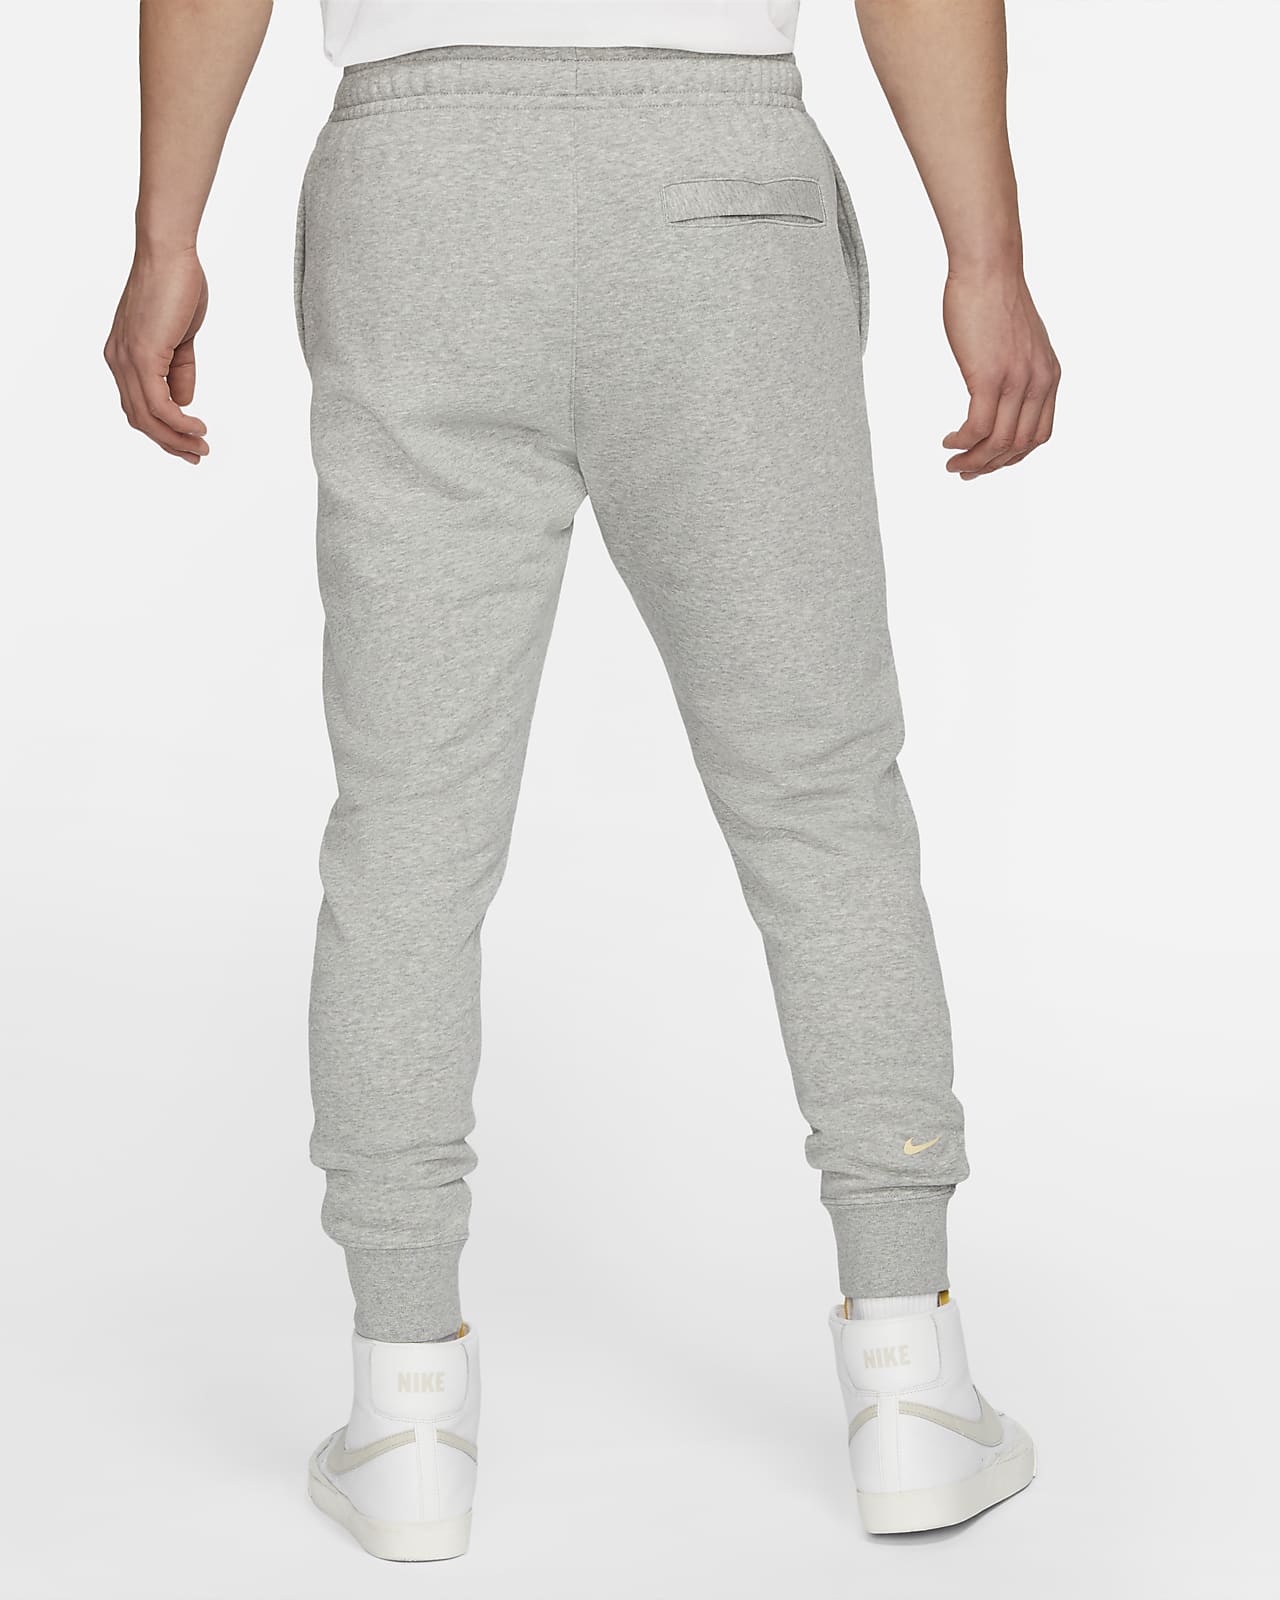 nike men's french terry joggers